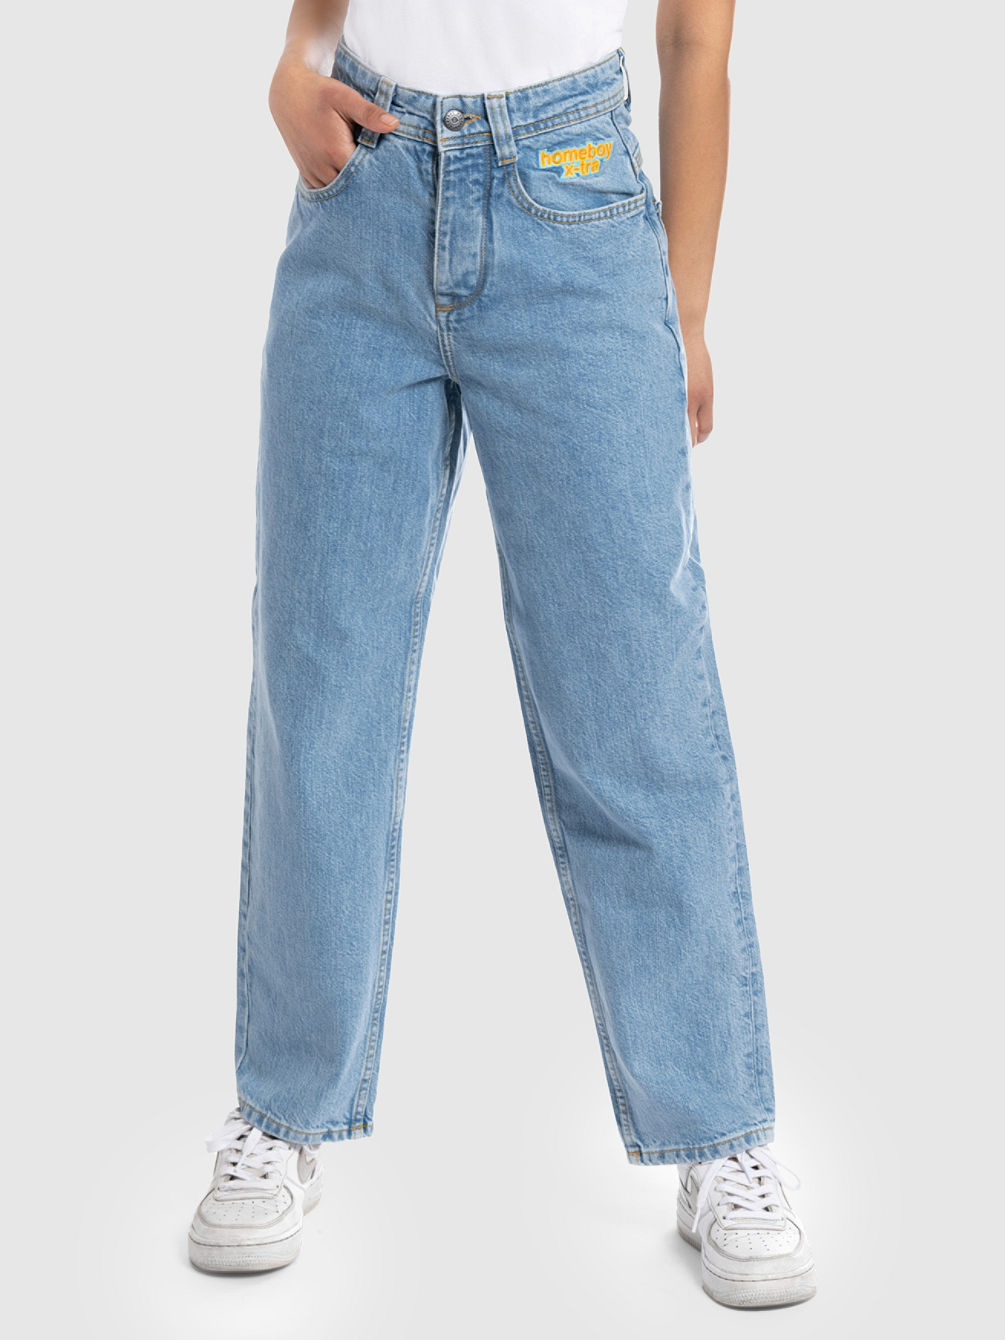 X-Tra BAGGY 28 Jeansy